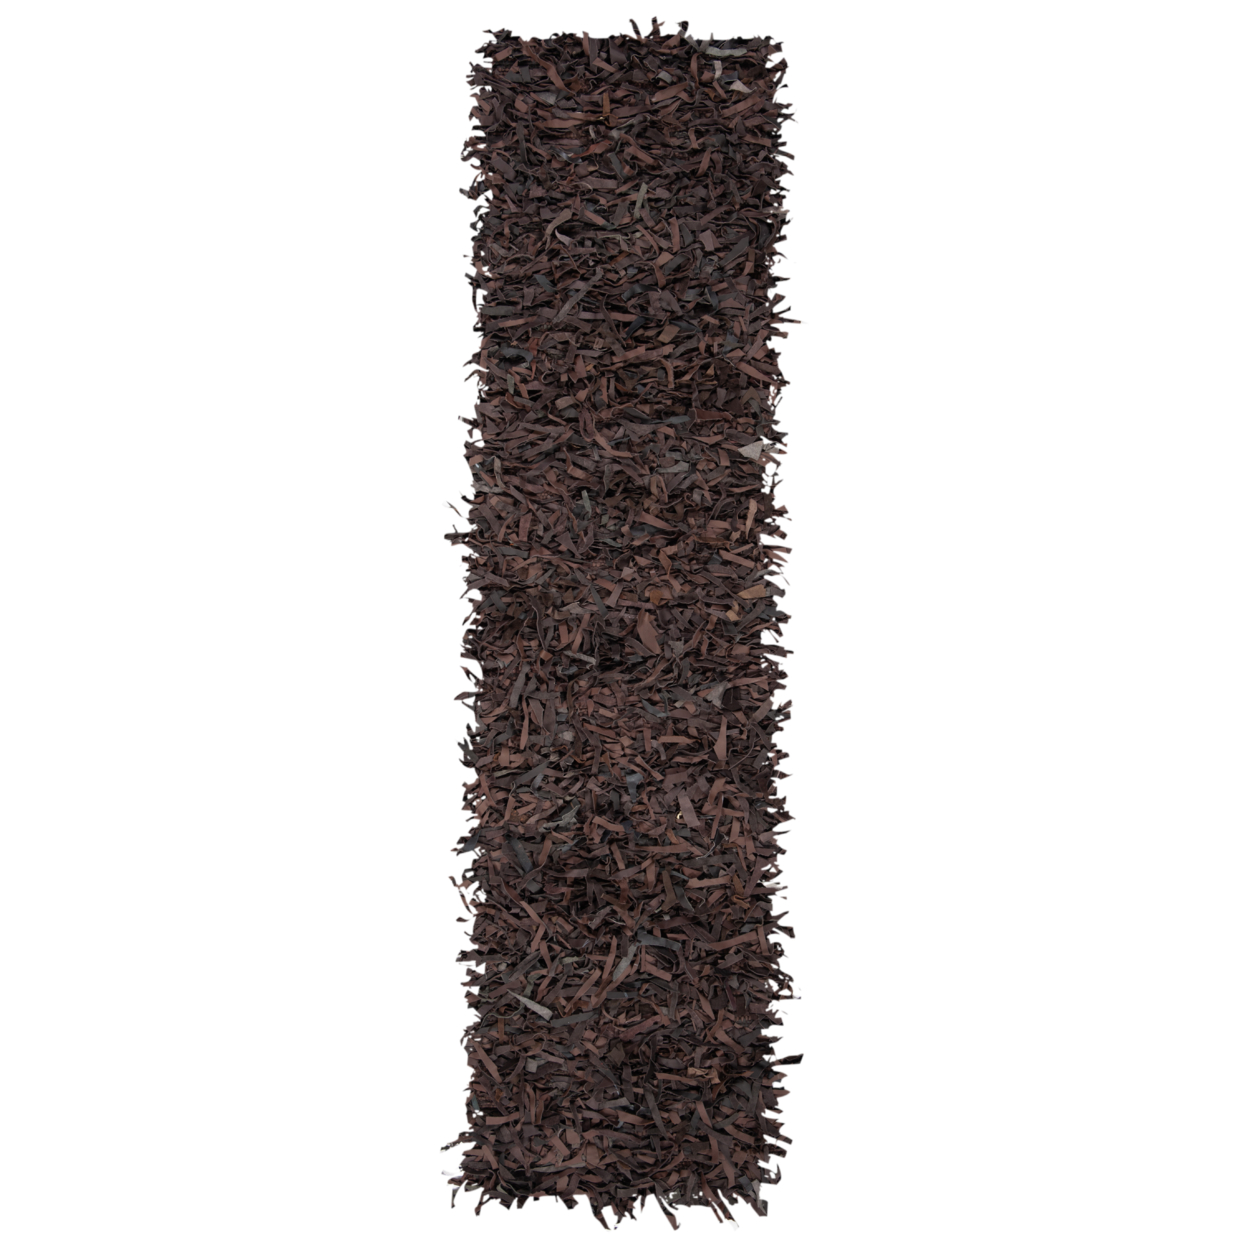 SAFAVIEH Leather Shag LSG601K Hand-knotted Dark Brown Rug - 5' Square